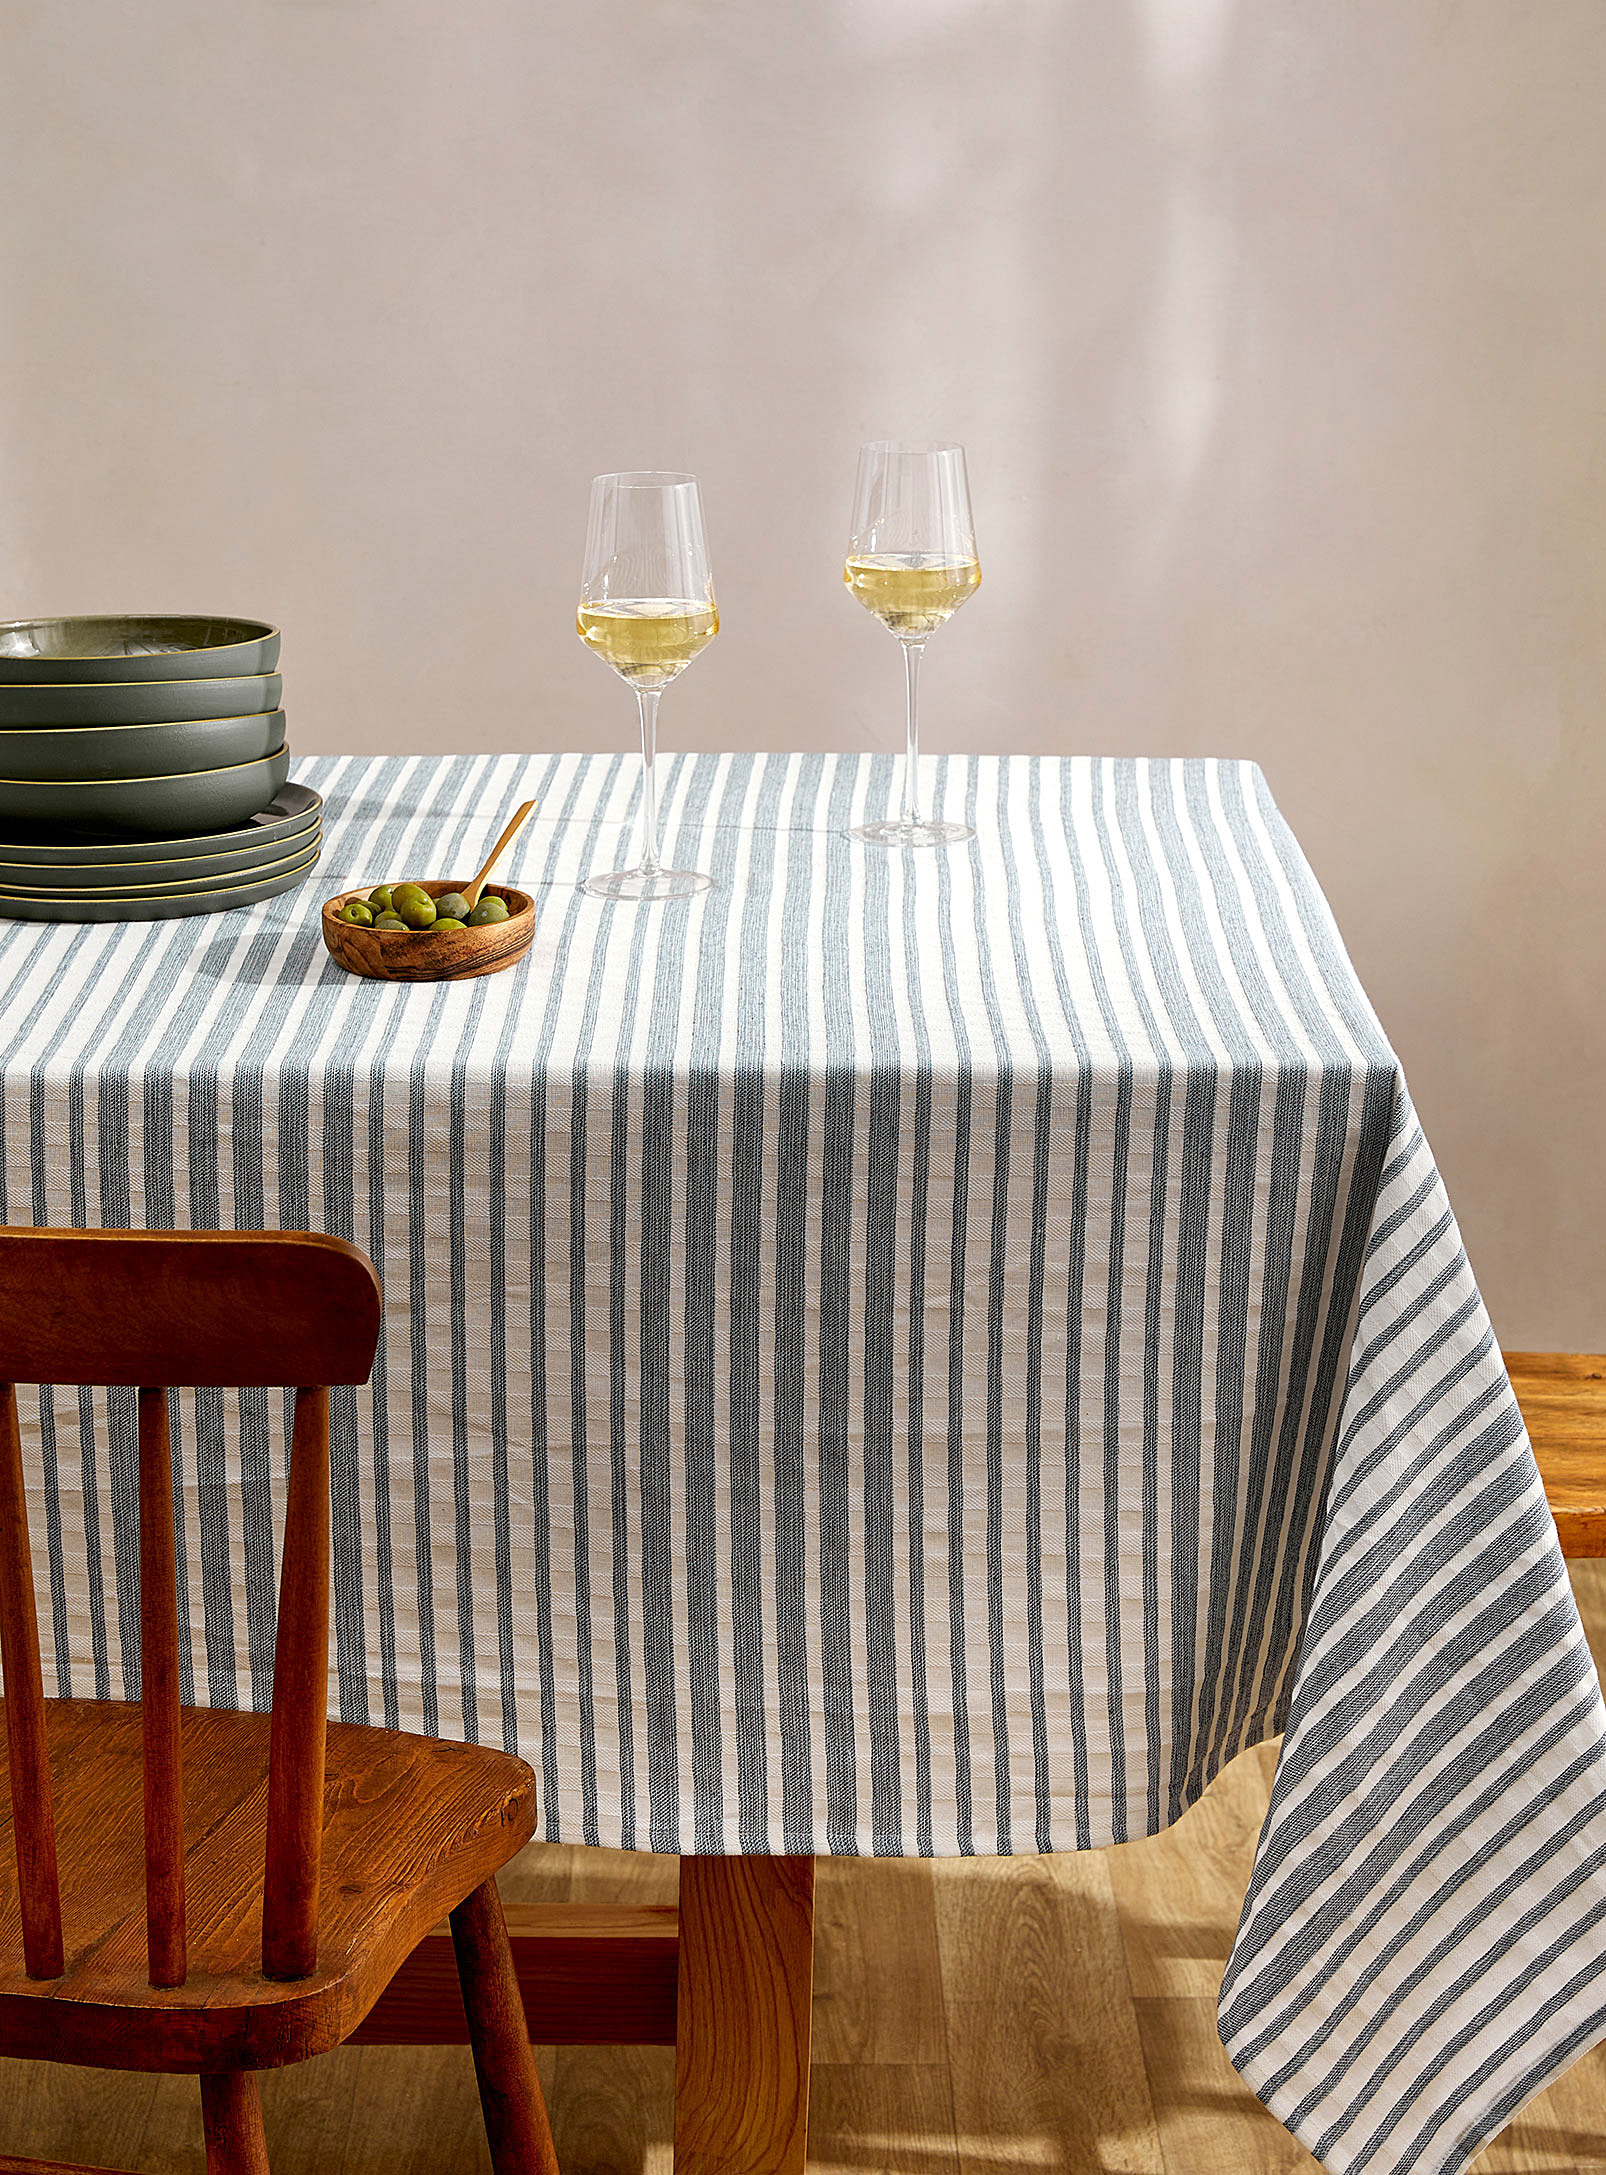 Simons Maison Ocean Stripes Recycled Cotton Tablecloth In Patterned White